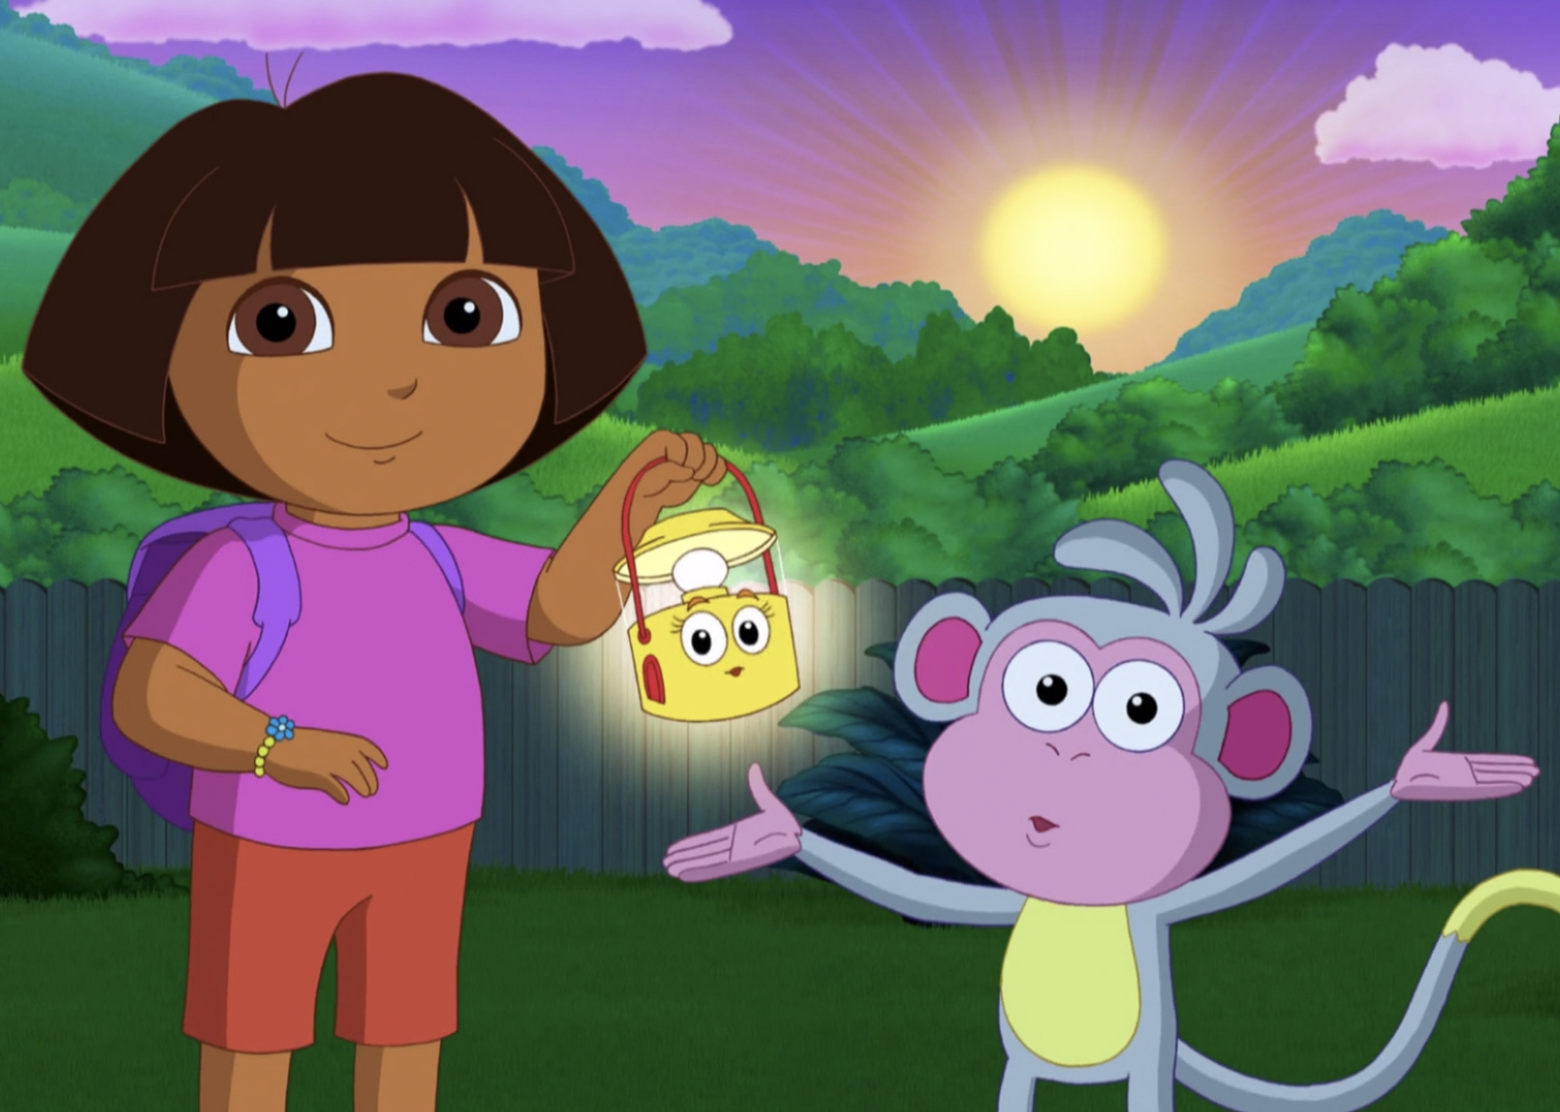 Screengrab of a scene from the animated show "Dora the Explorer"